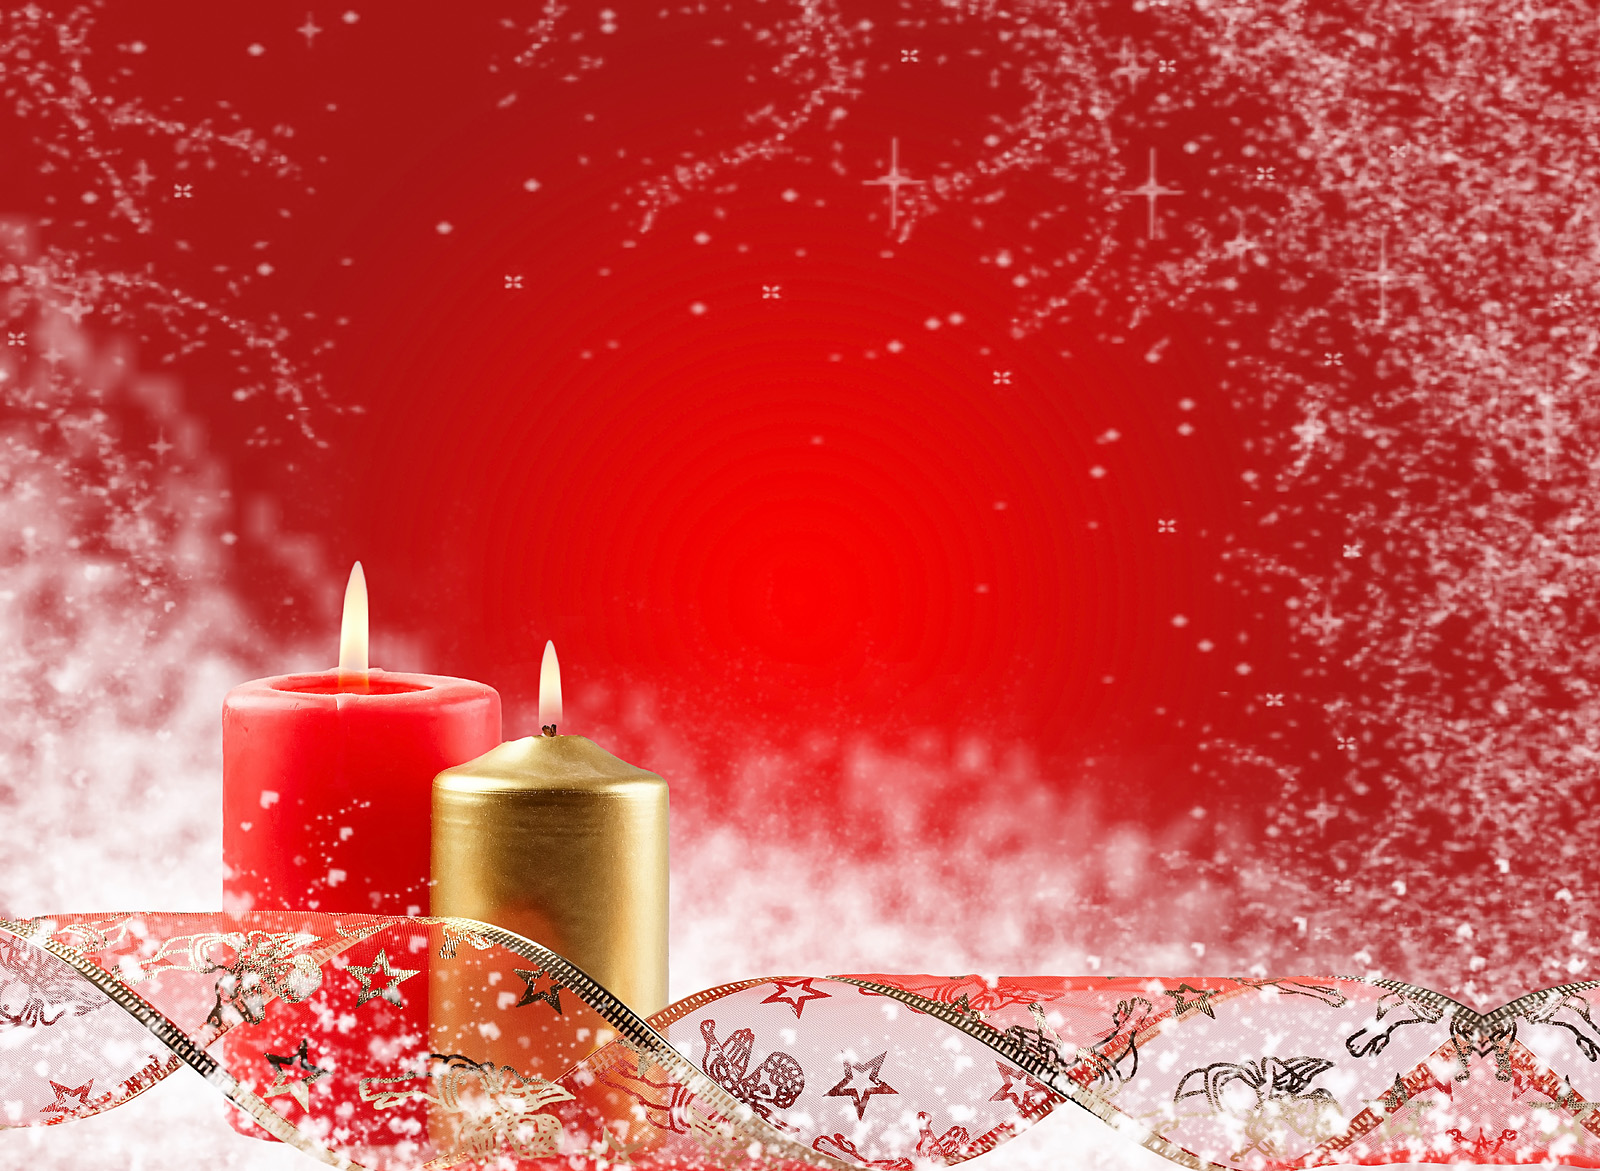 Christmas Candles Wallpaper Pictures Image Pics Photos